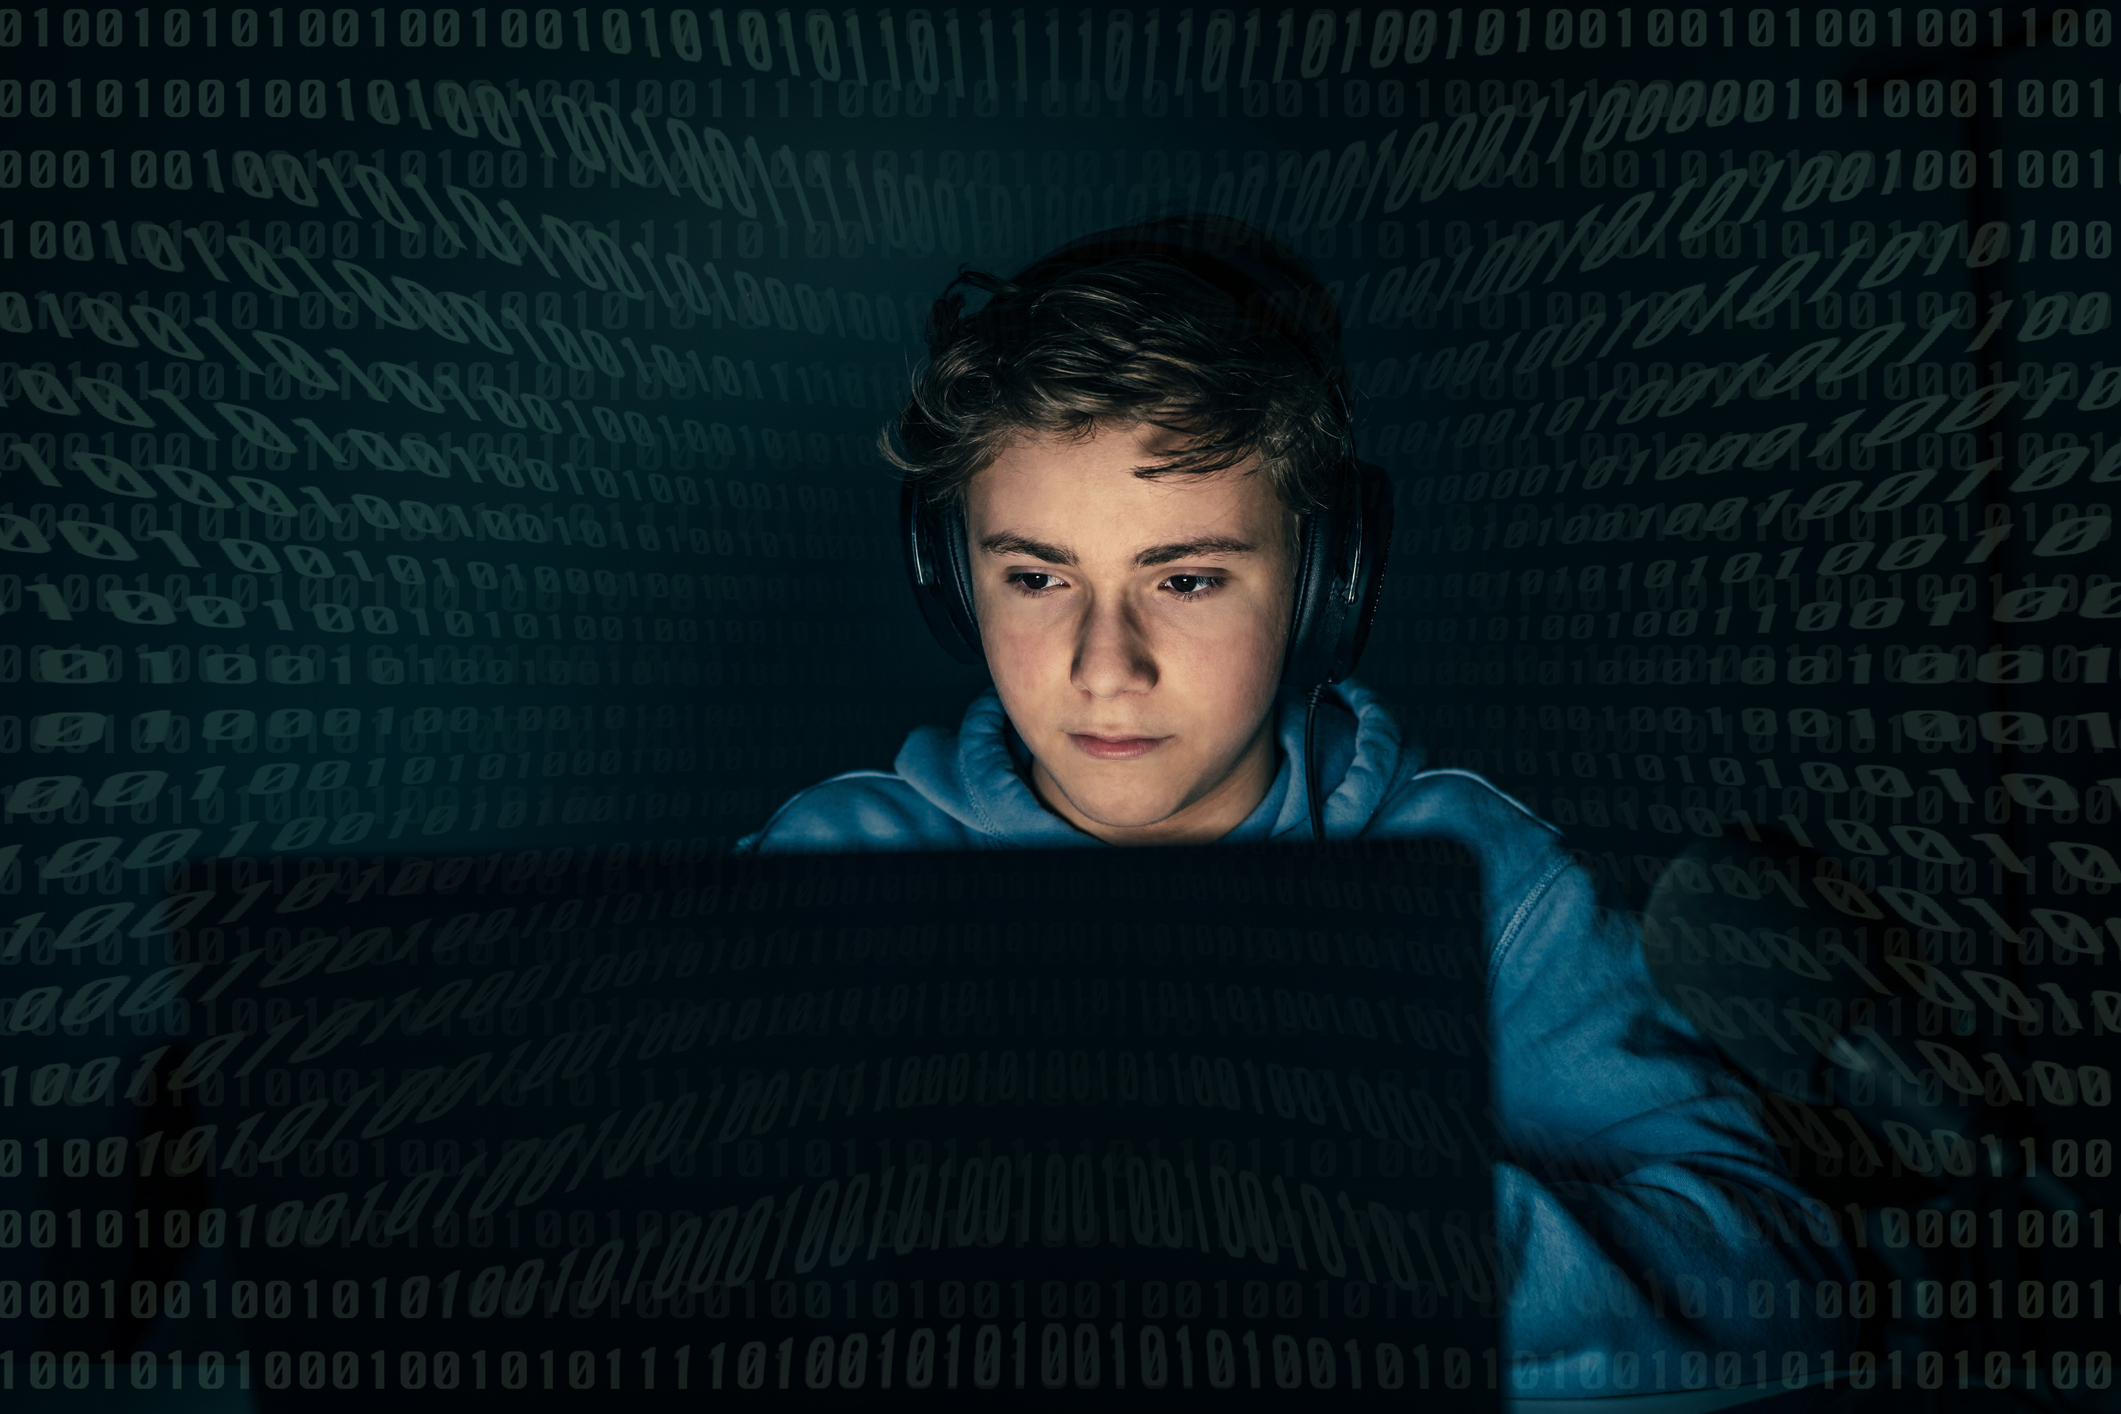 Courts face constitutional issues in safeguarding children online